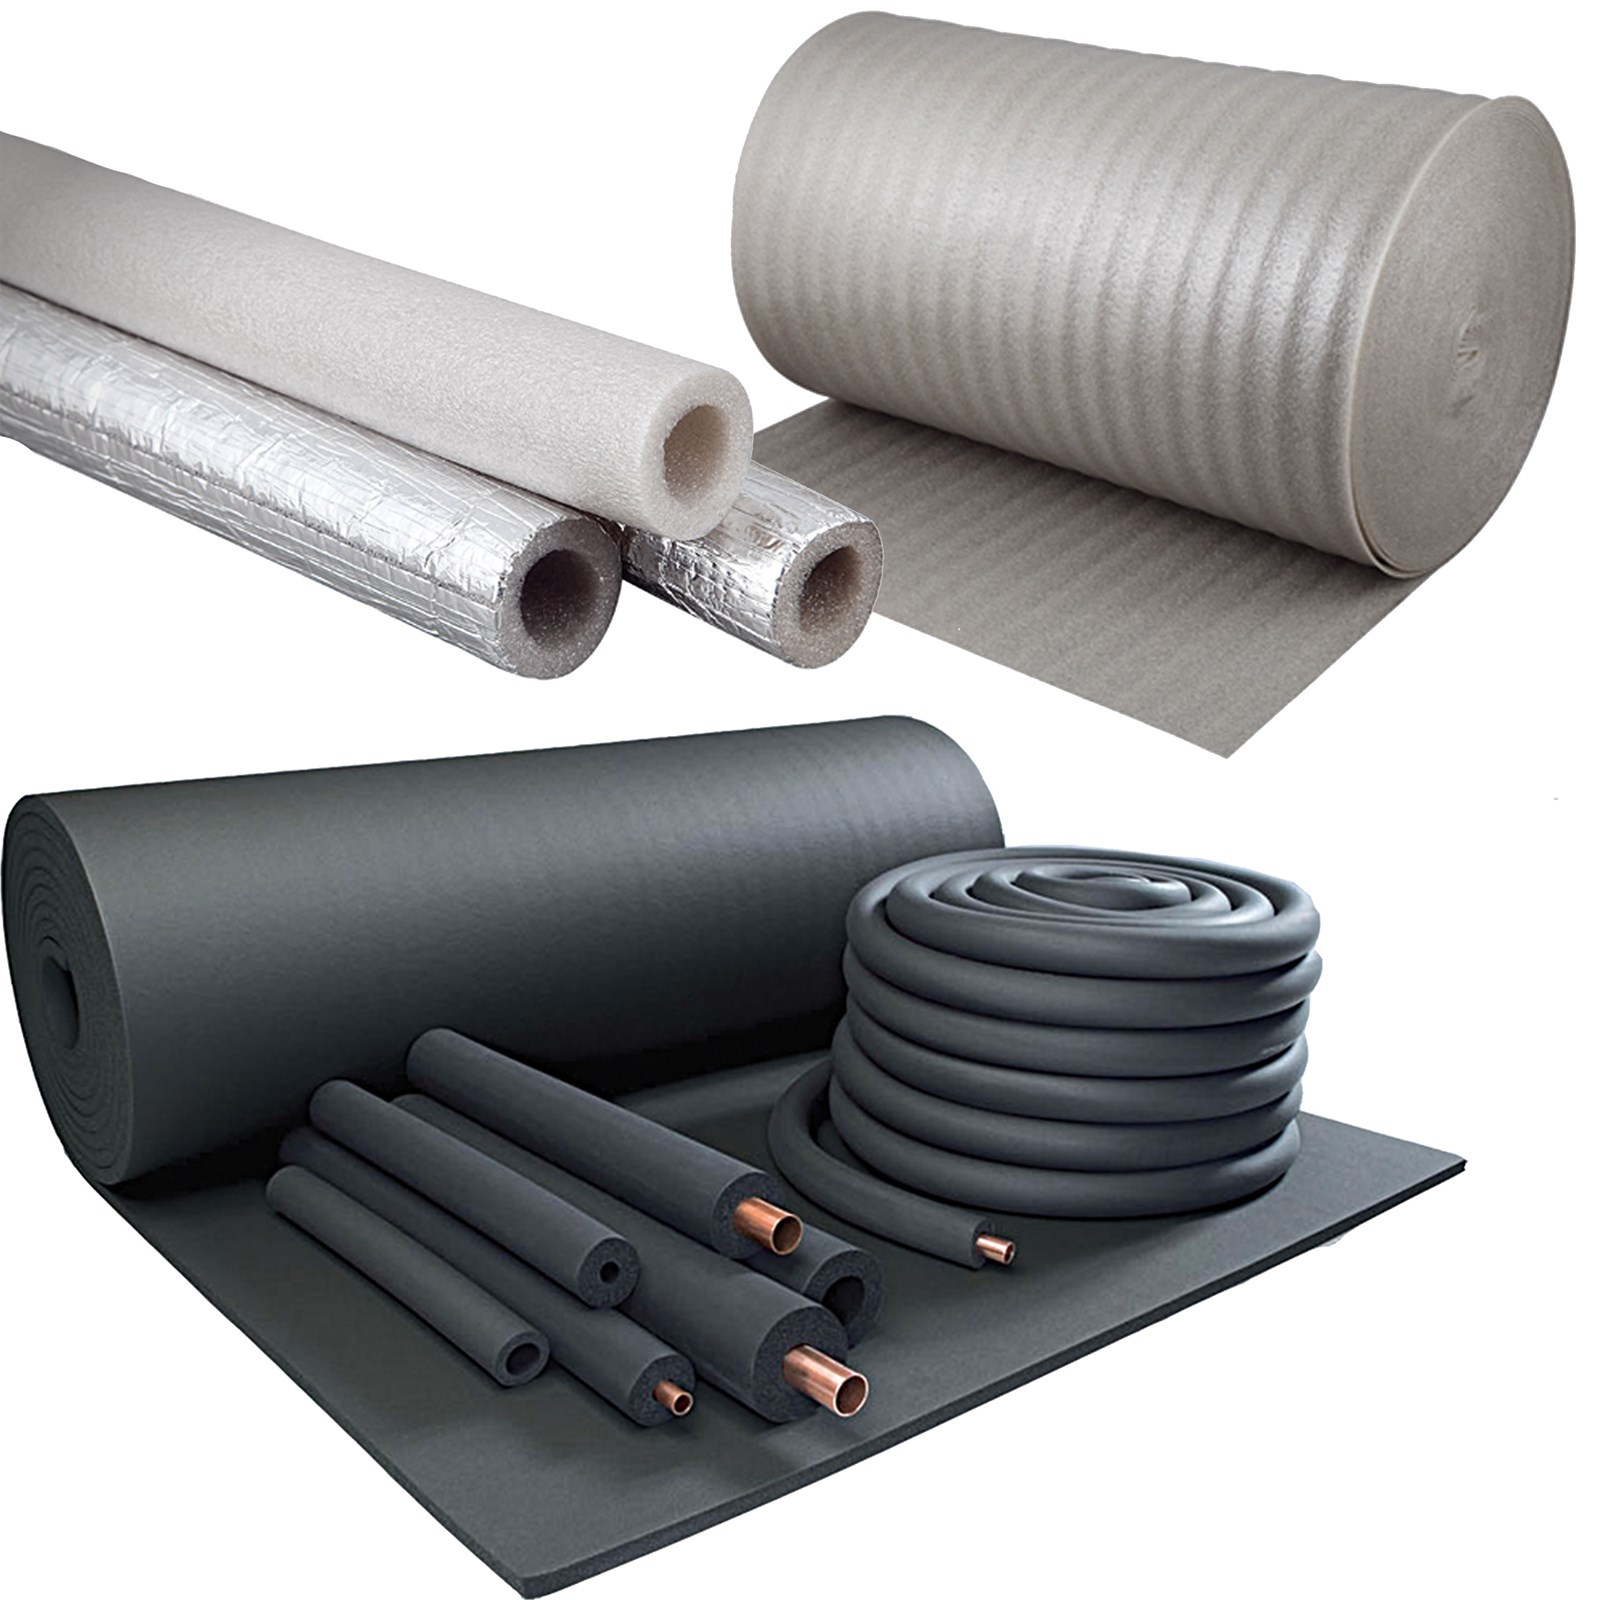 Polymer / Rubber Based Thermal Insulation Materials